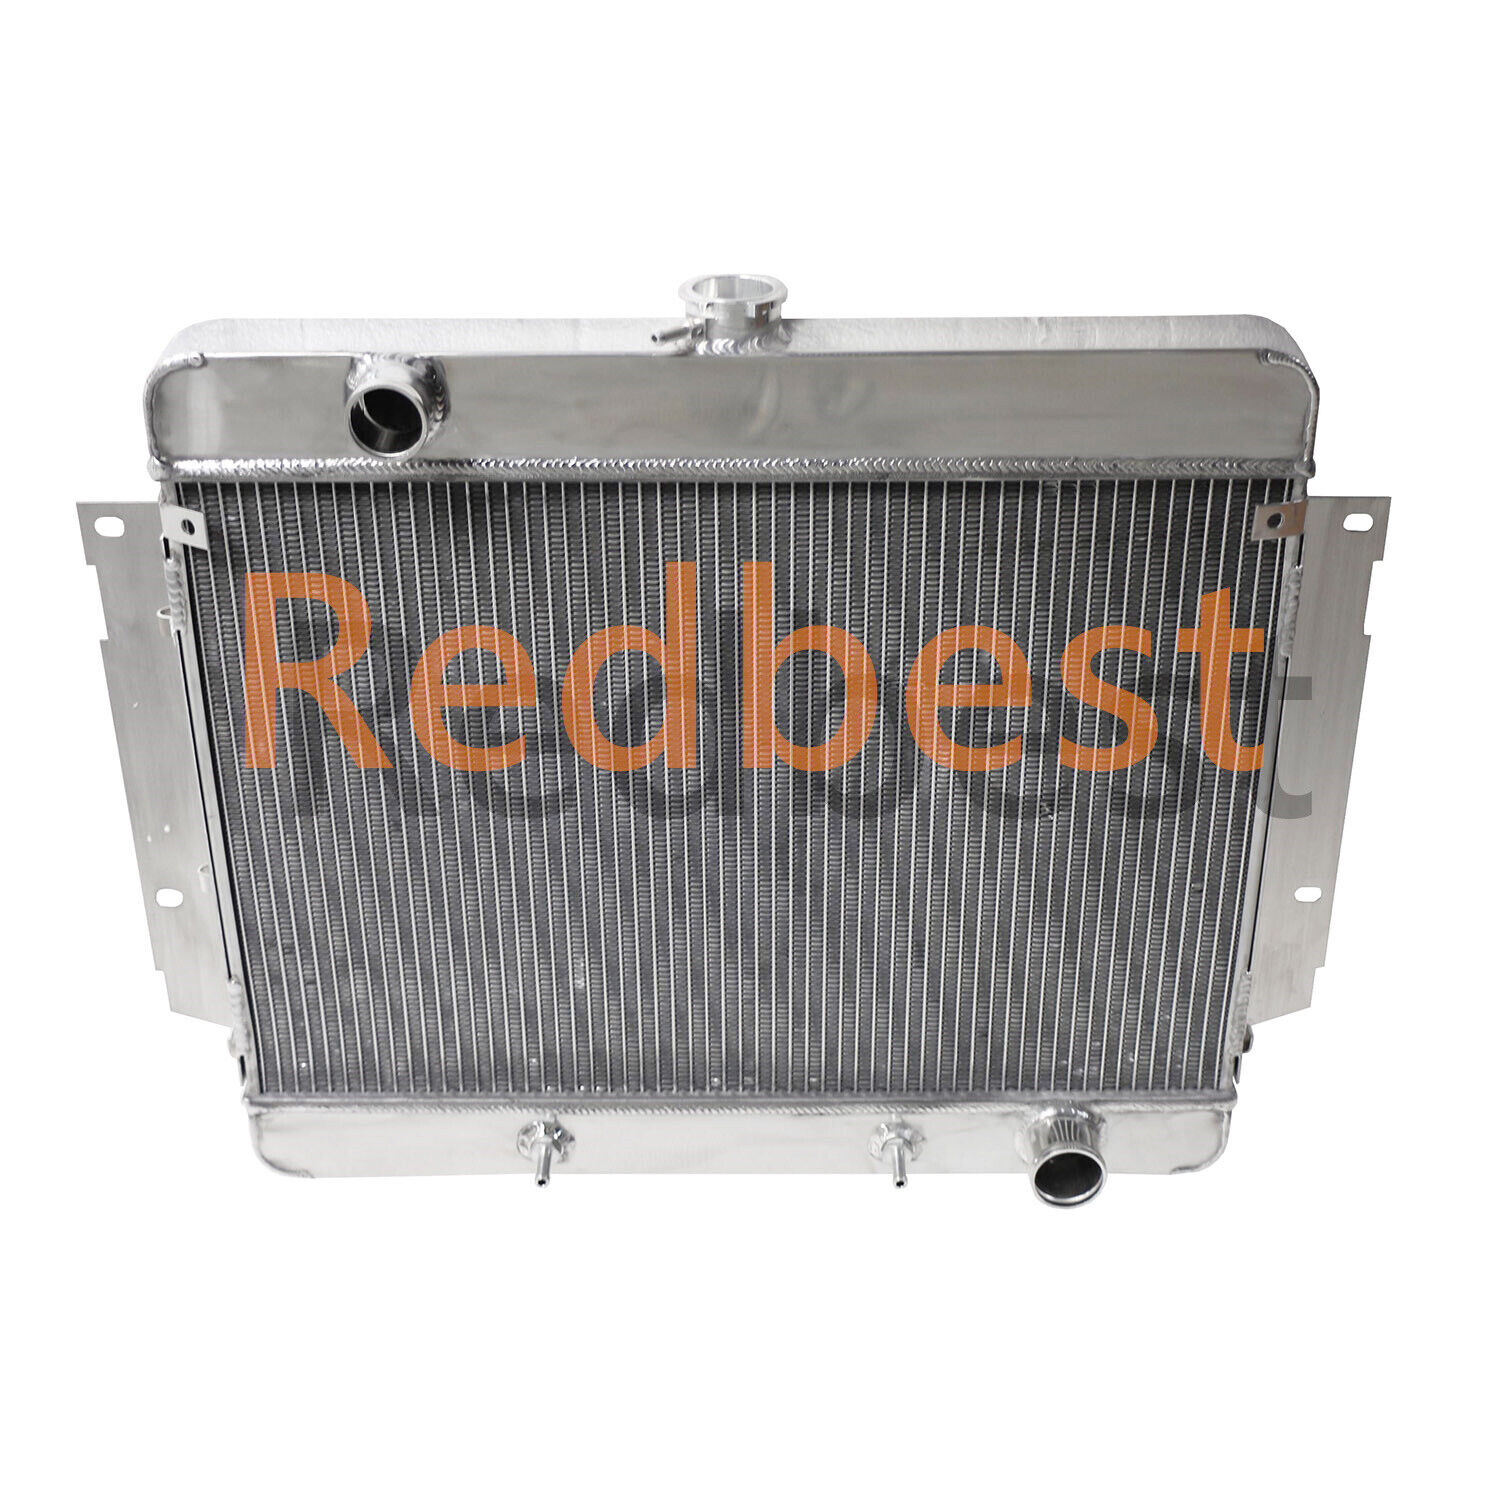 3 Row Radiator For 1969 1970 Chevy Impala/Kingswood/Caprice/Biscayne 4.1L-7.4L